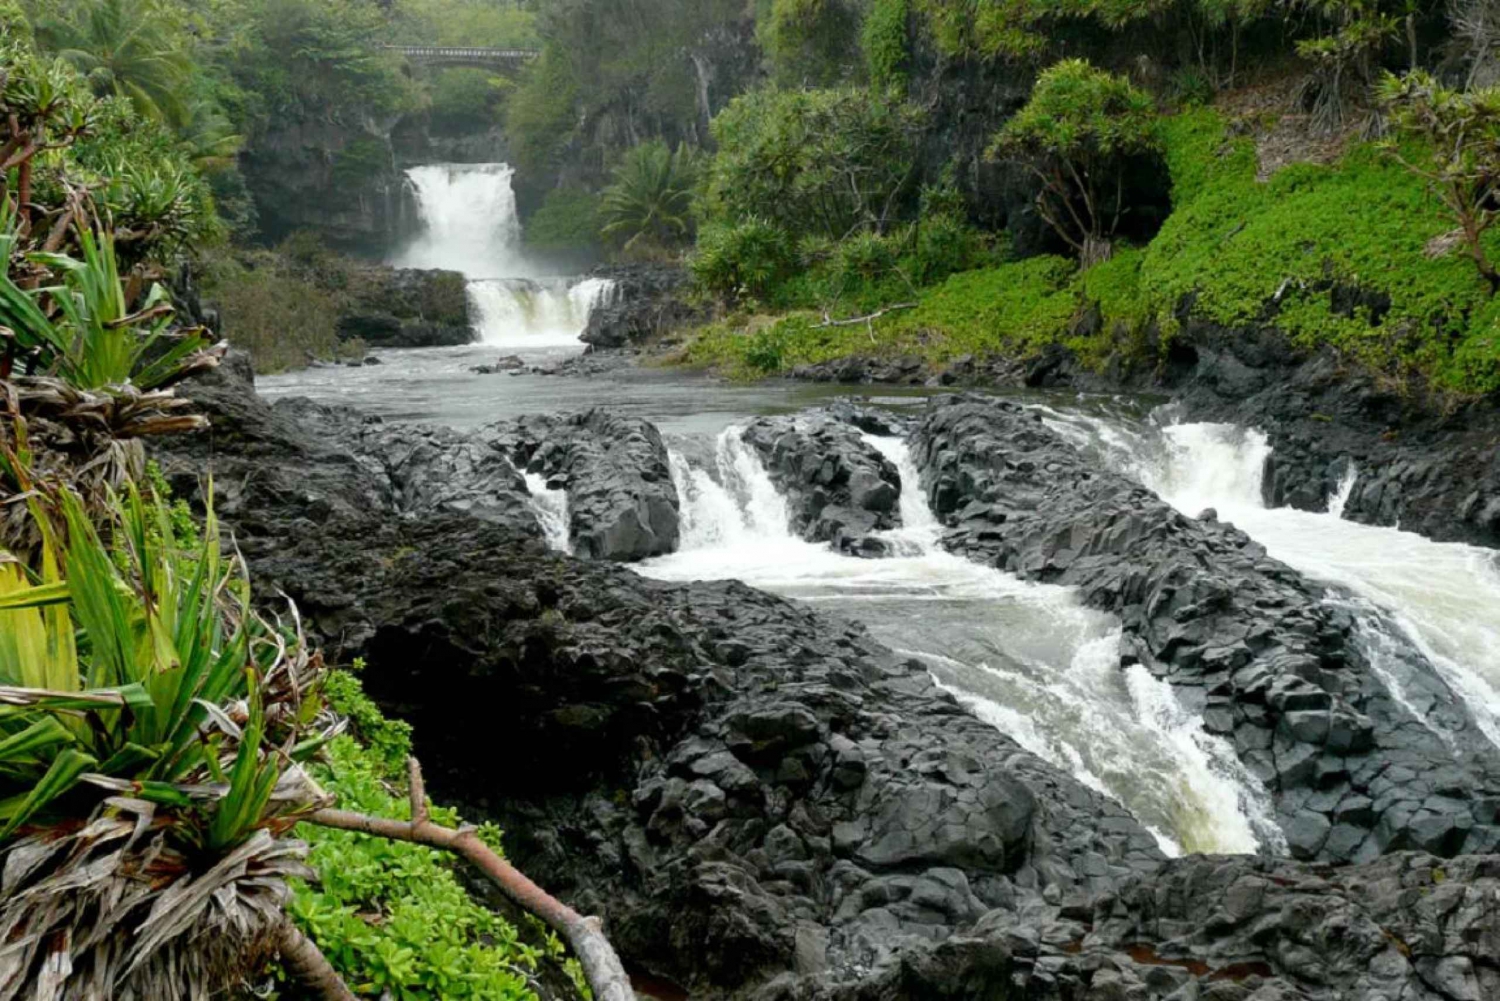 Maui: Full Day Hiking Tour with Lunch